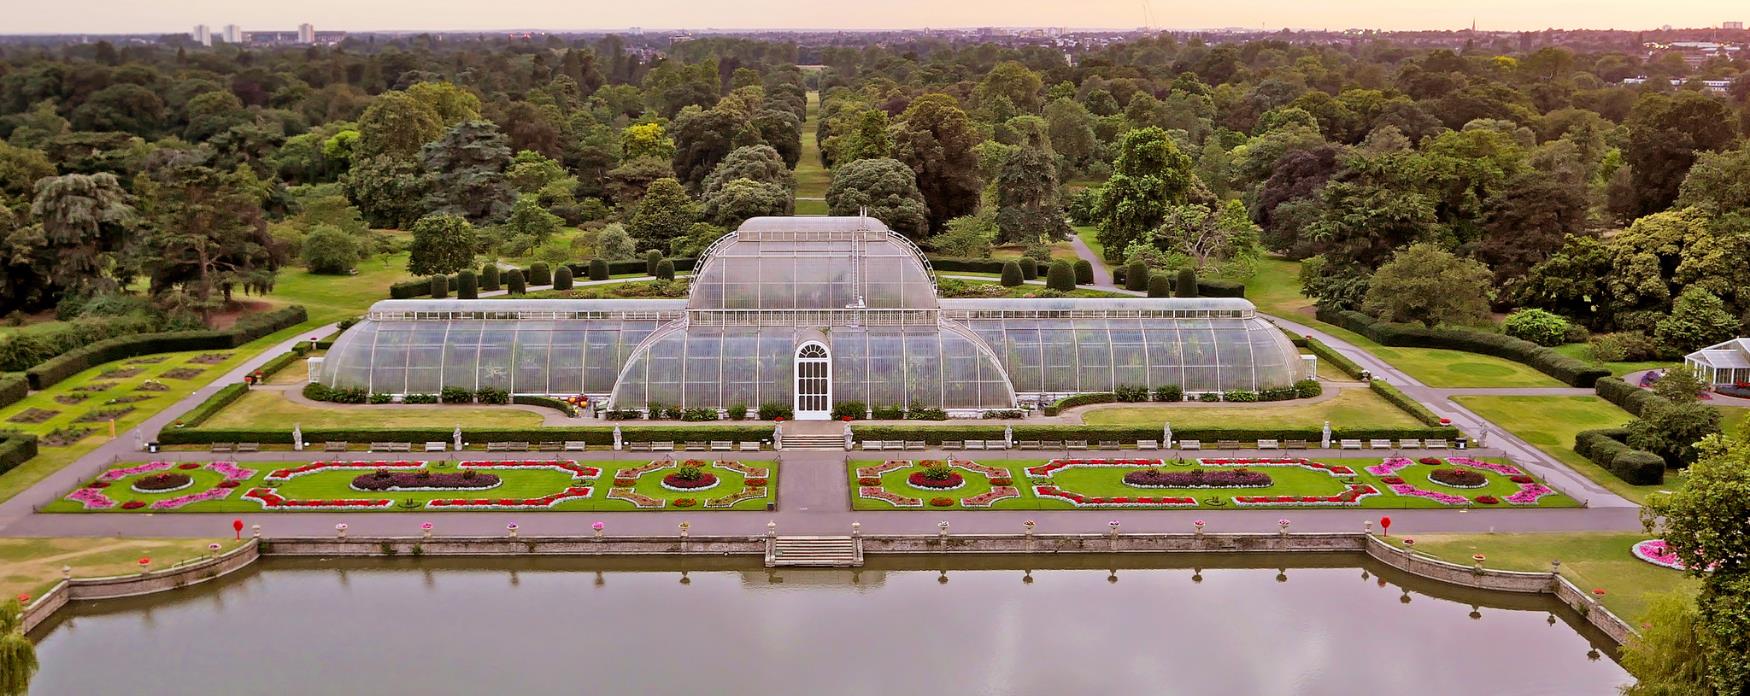 Aerial view of Palm House, Kew Gardens